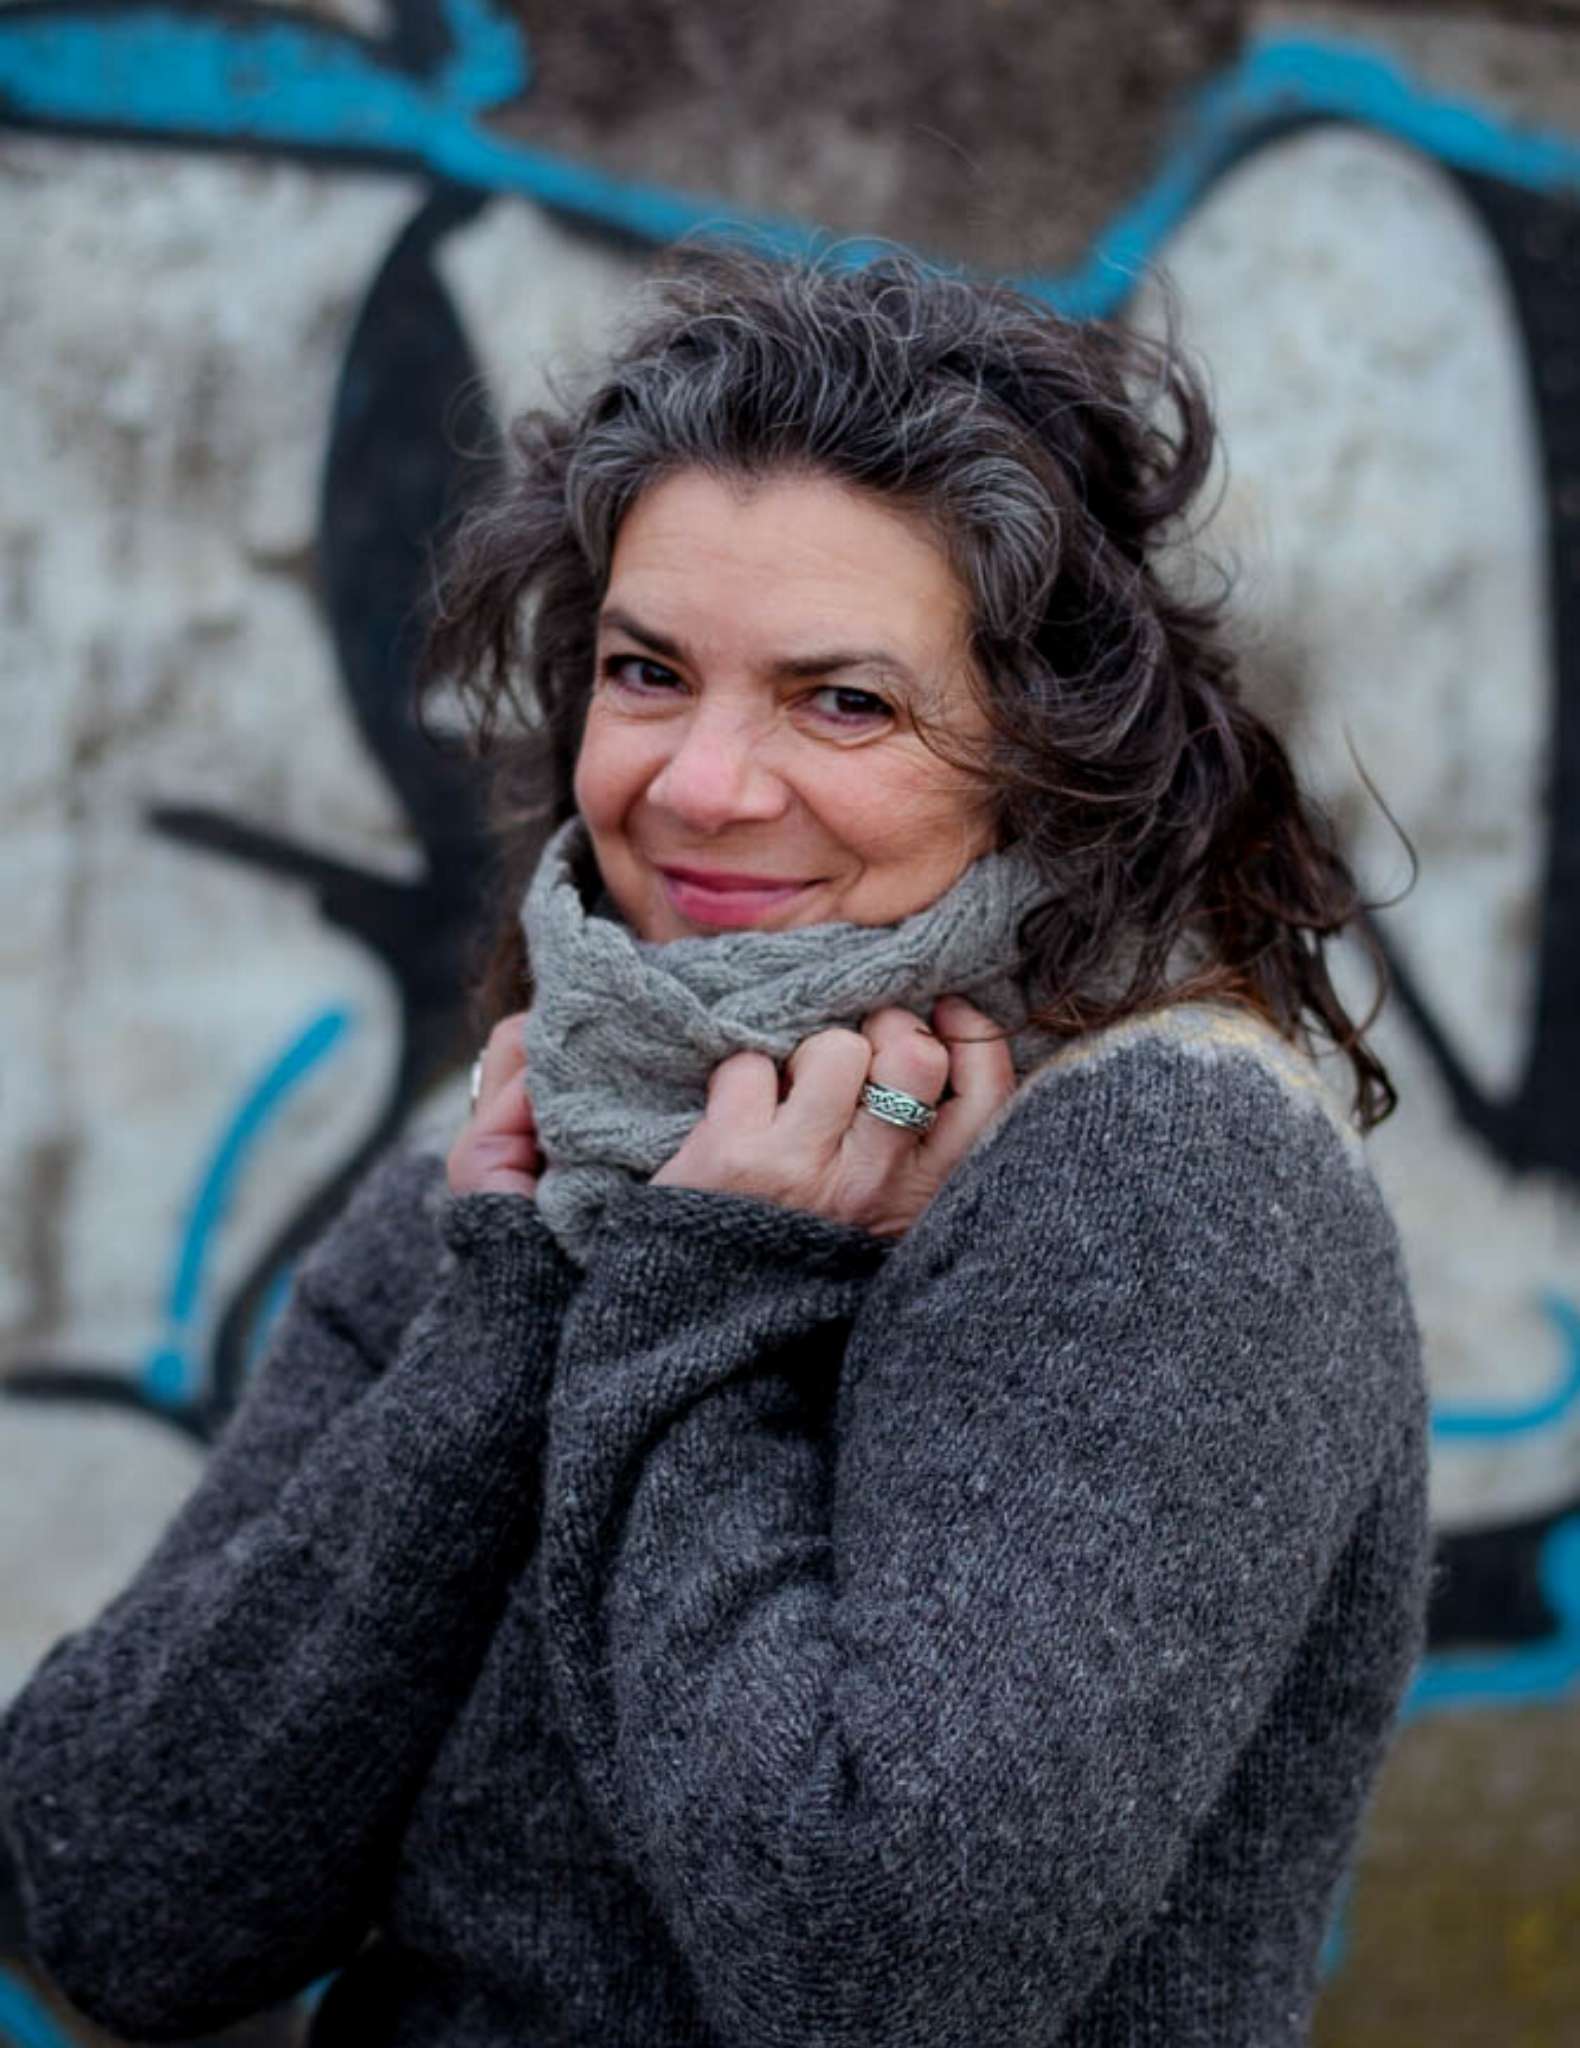 a white woman in her 50s with dark curly hair wears a grey sweater and pale grey cowl. Their hands are held up to the cowl and they are smiling.